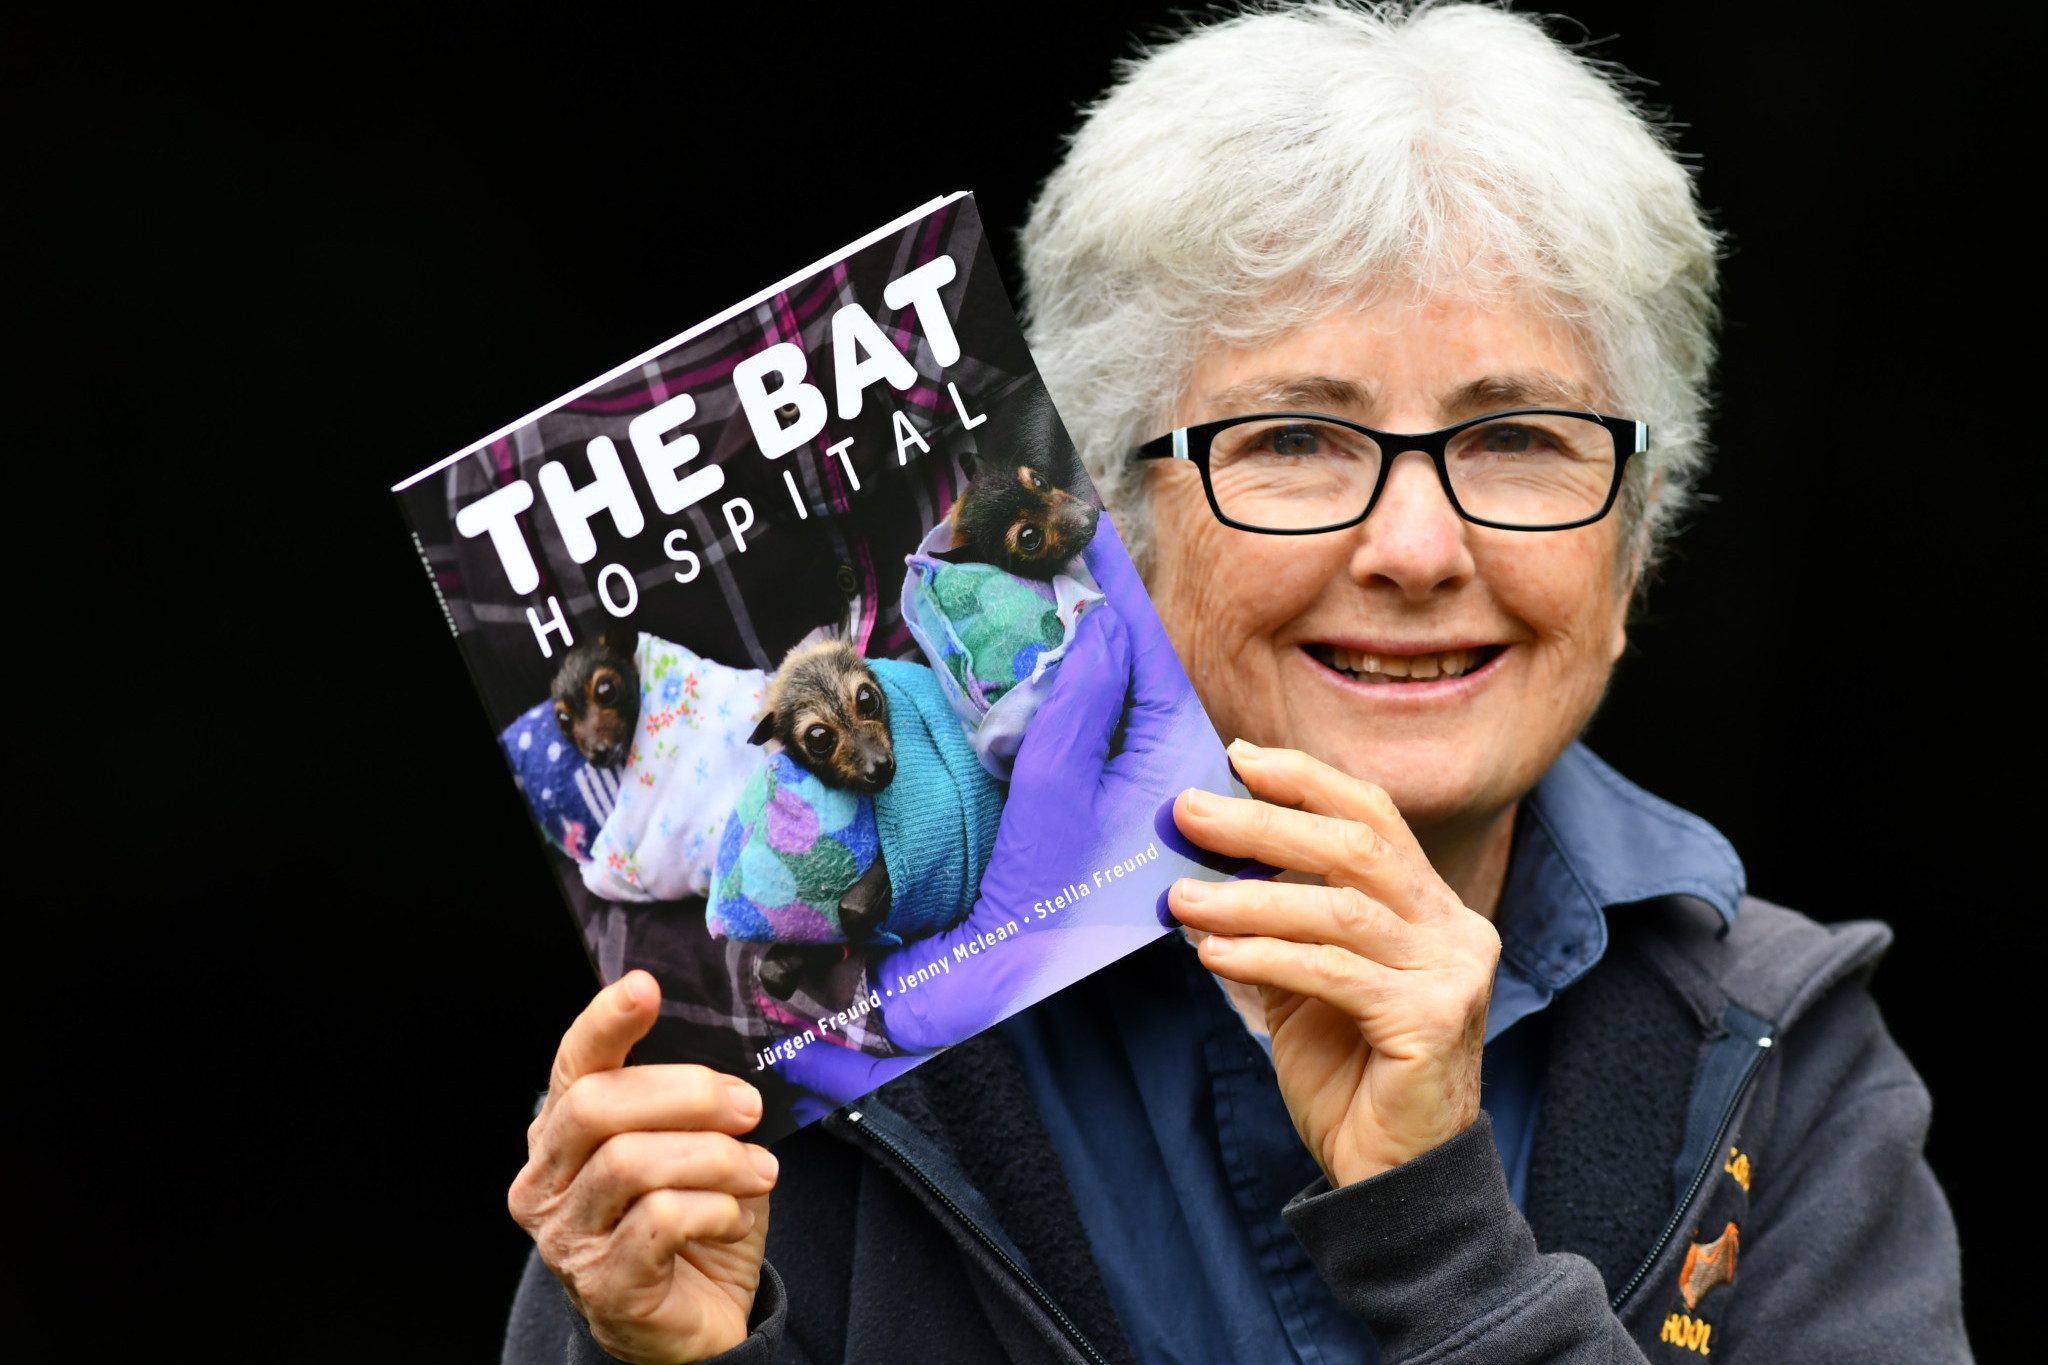 Jennefer Mclean OAM with the new book to be launched on 11 August.